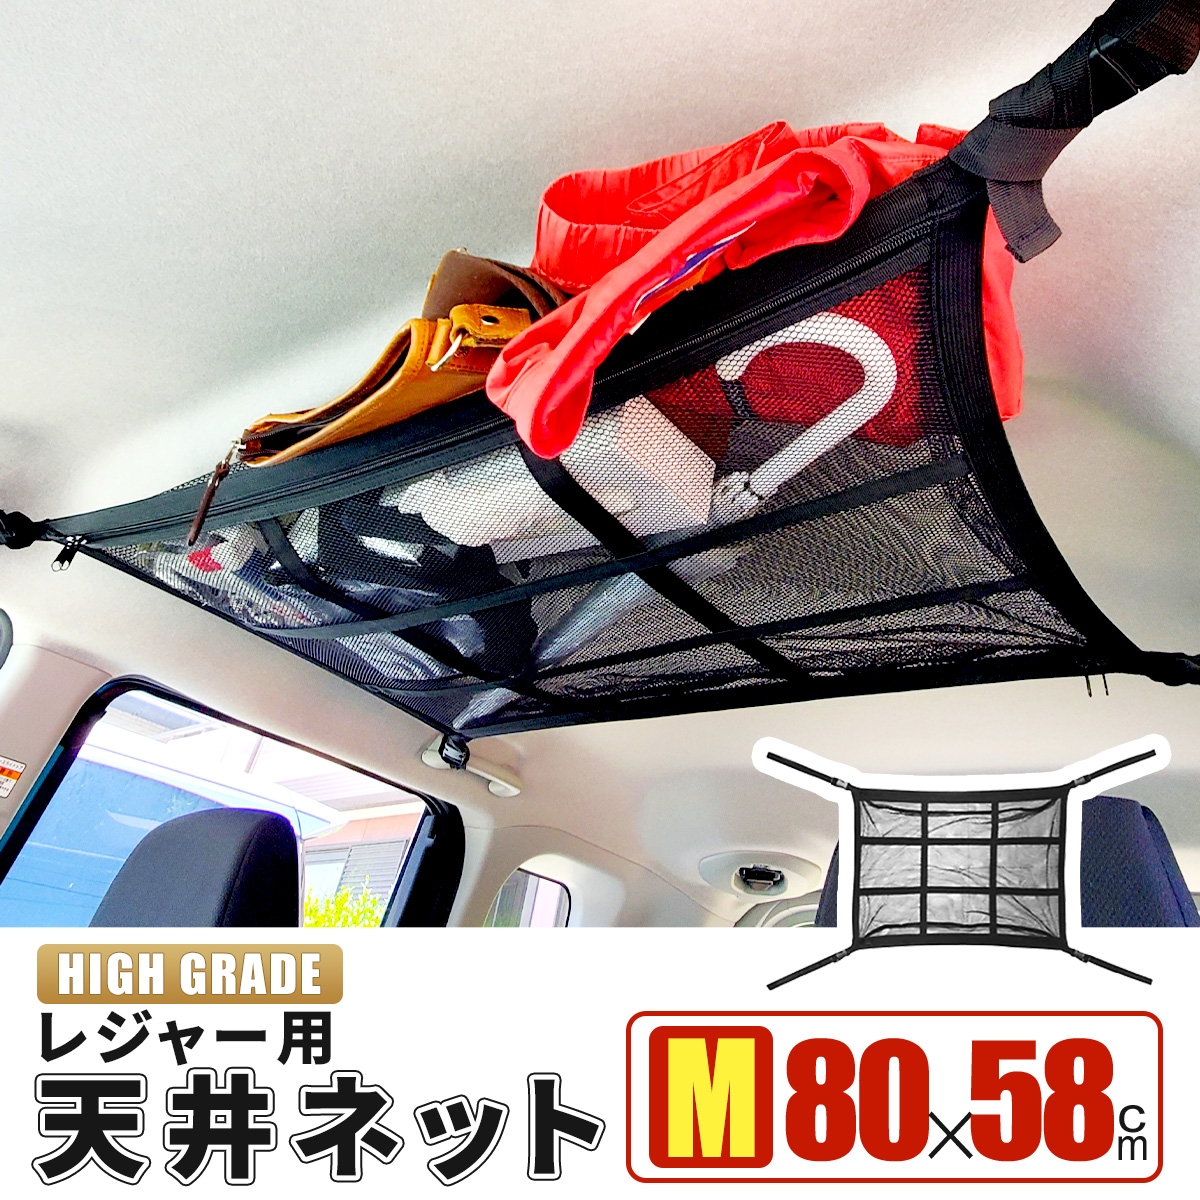 MK&JAMT car storage ceiling roof net roof box M size 80x58cm cargo net luggage net sleeping area in the vehicle japanese manual 